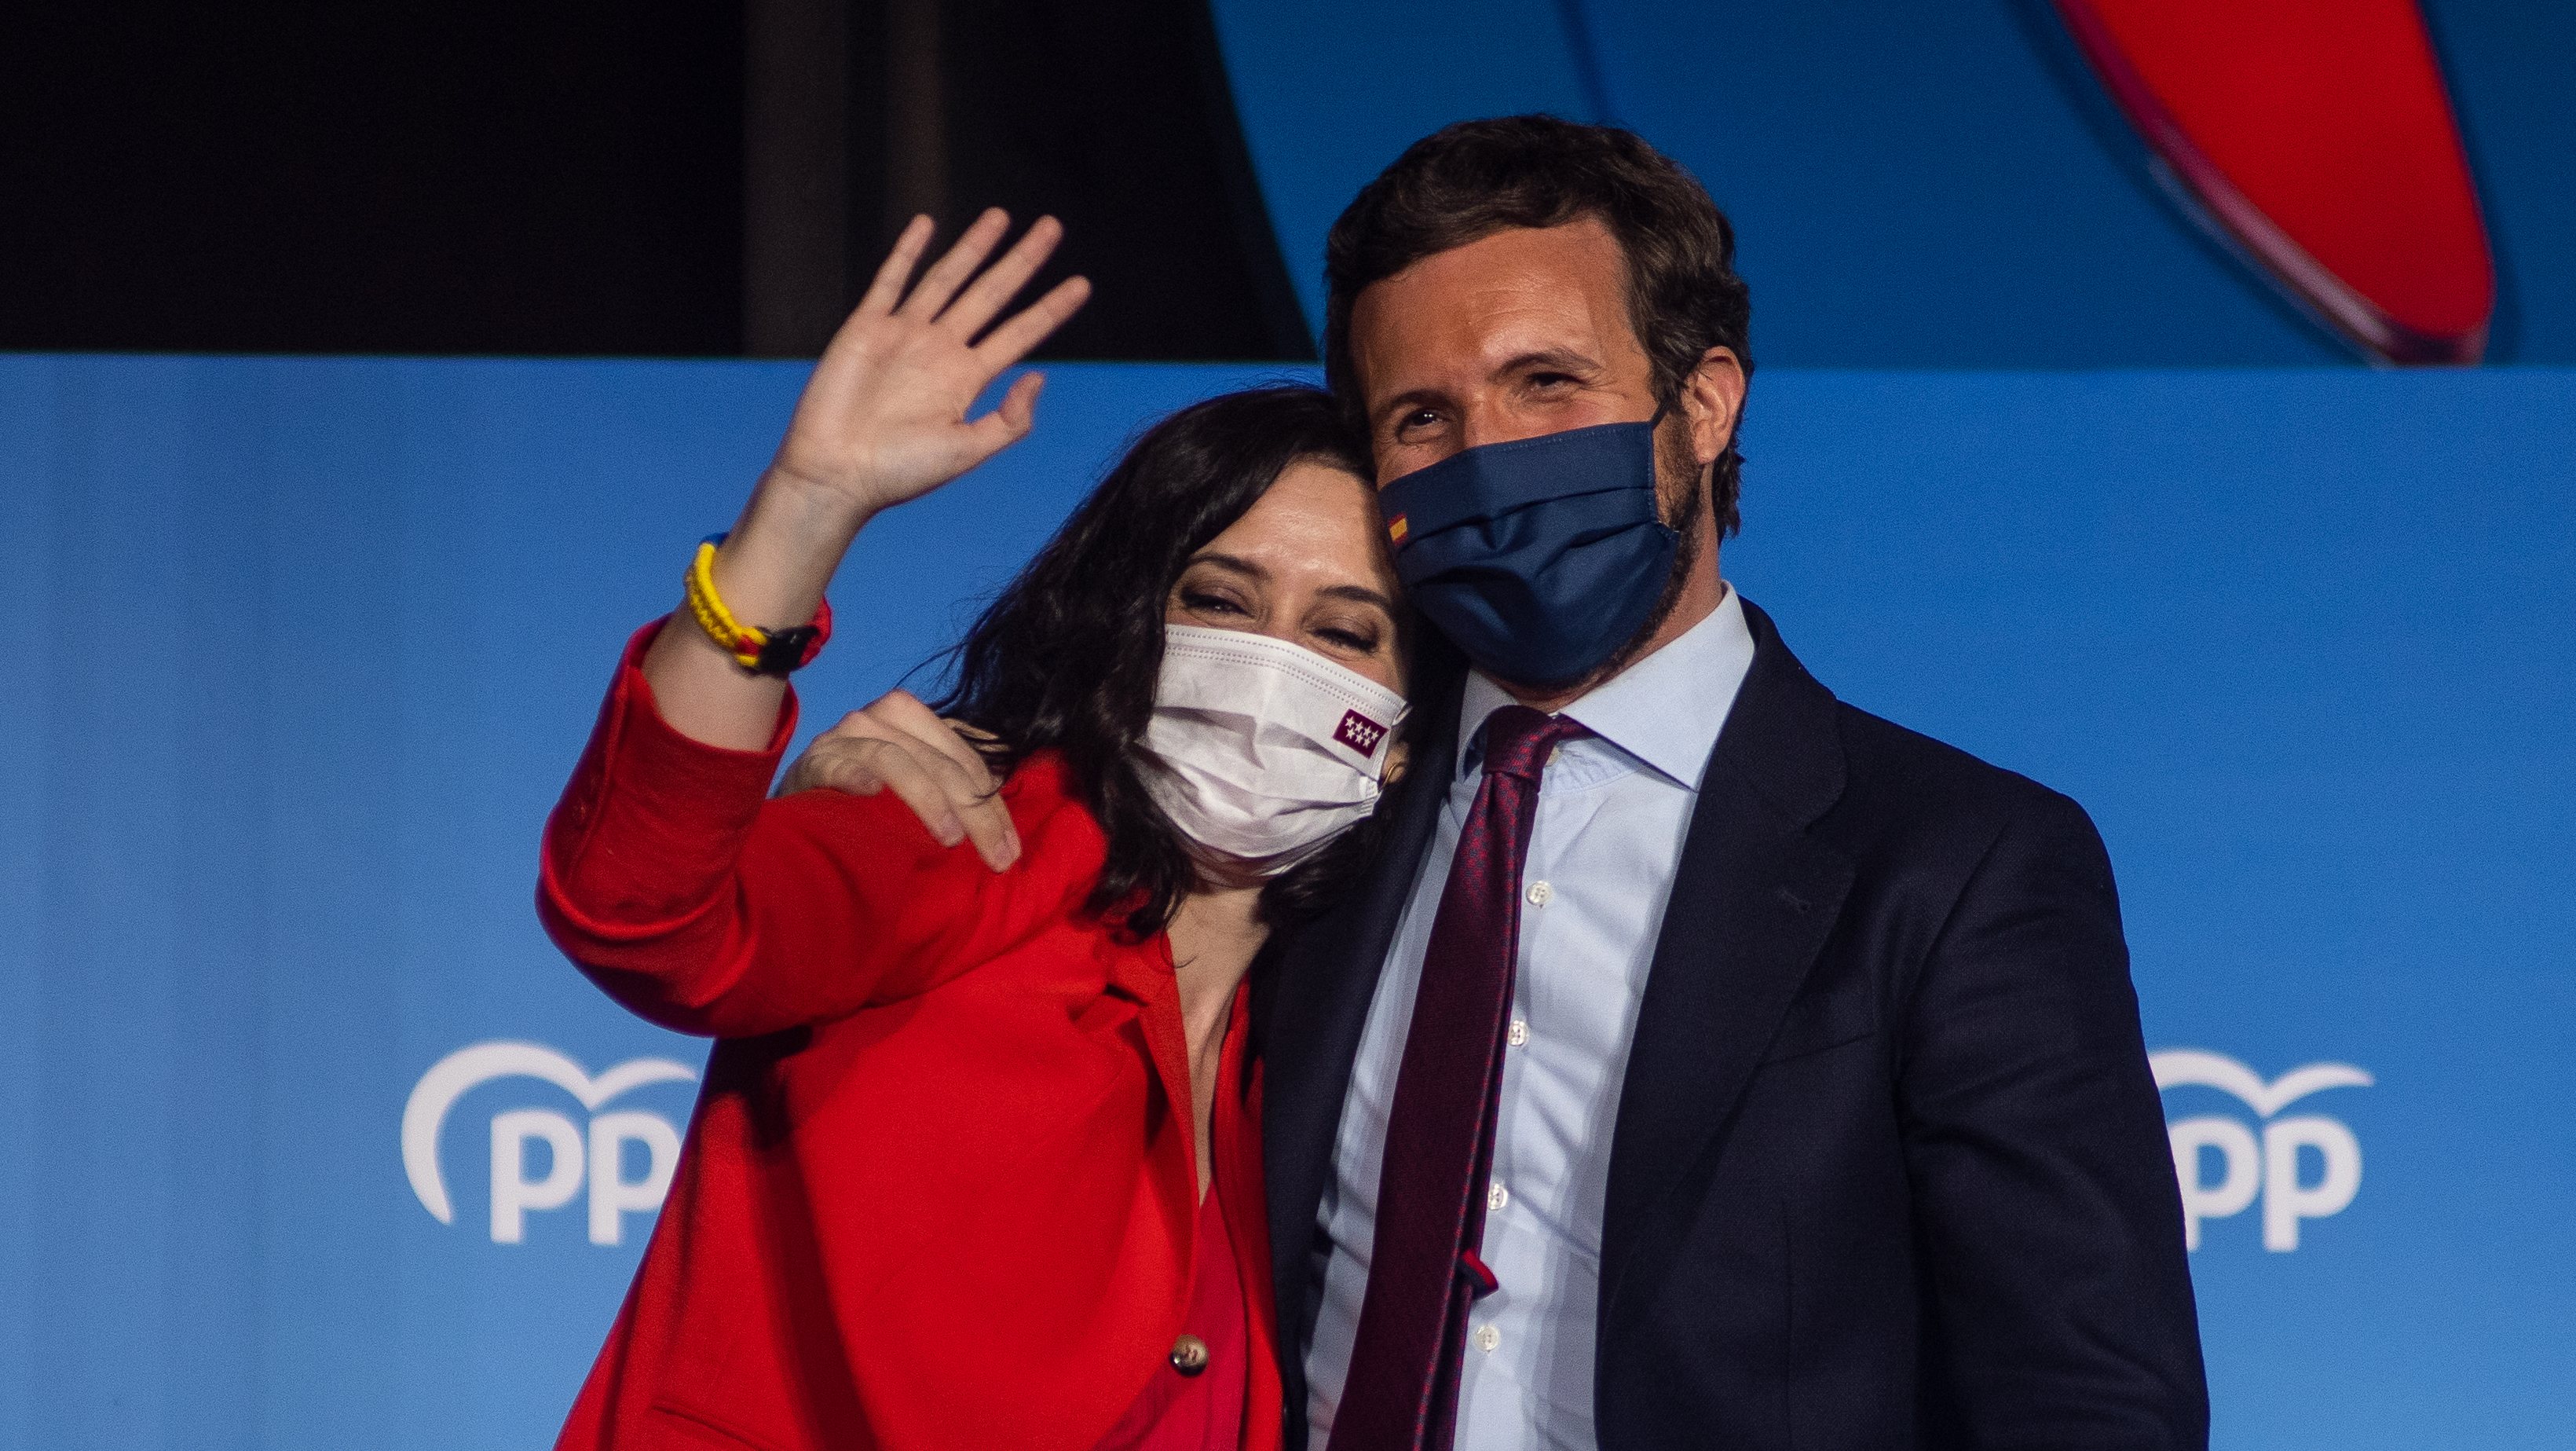 Candidate Isabel Diaz Ayuso (left)  and leader of Popular